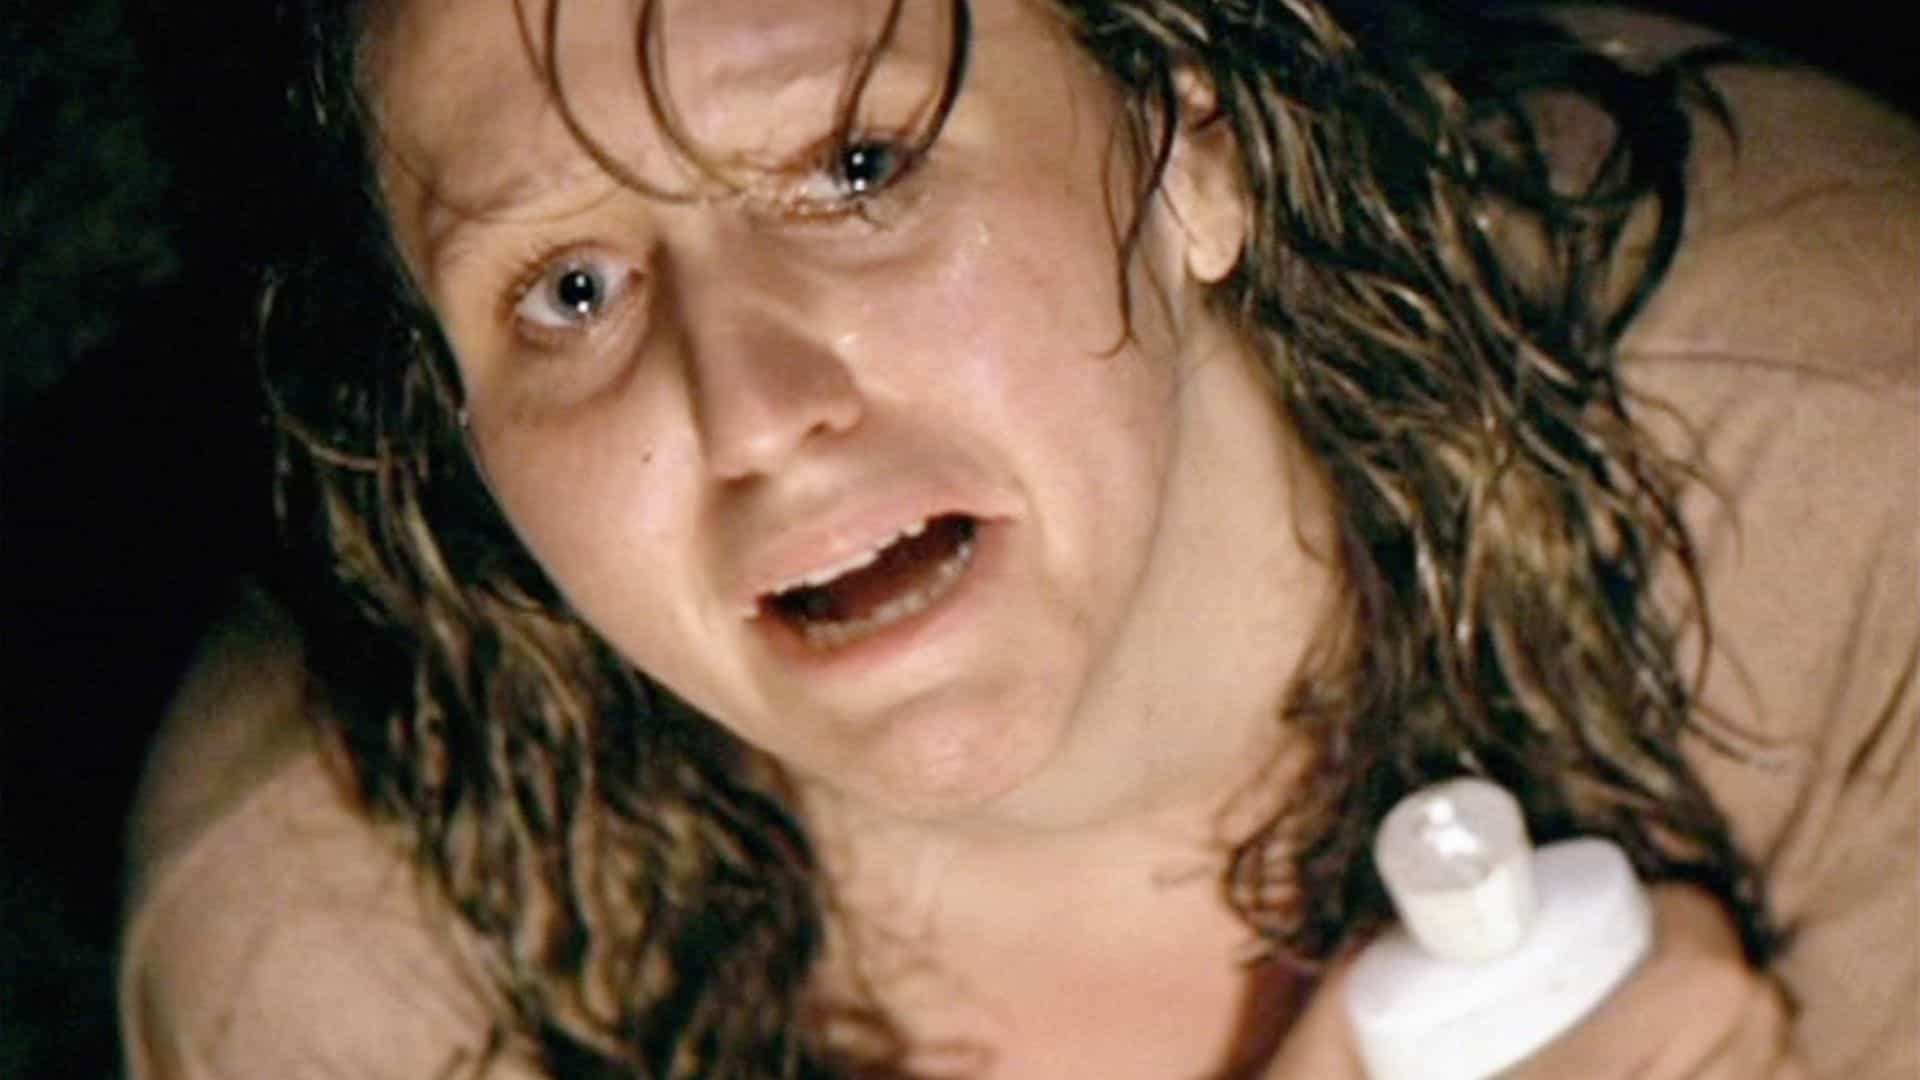 A woman holds a bottle of lotion in this image from Strong Heart Productions.